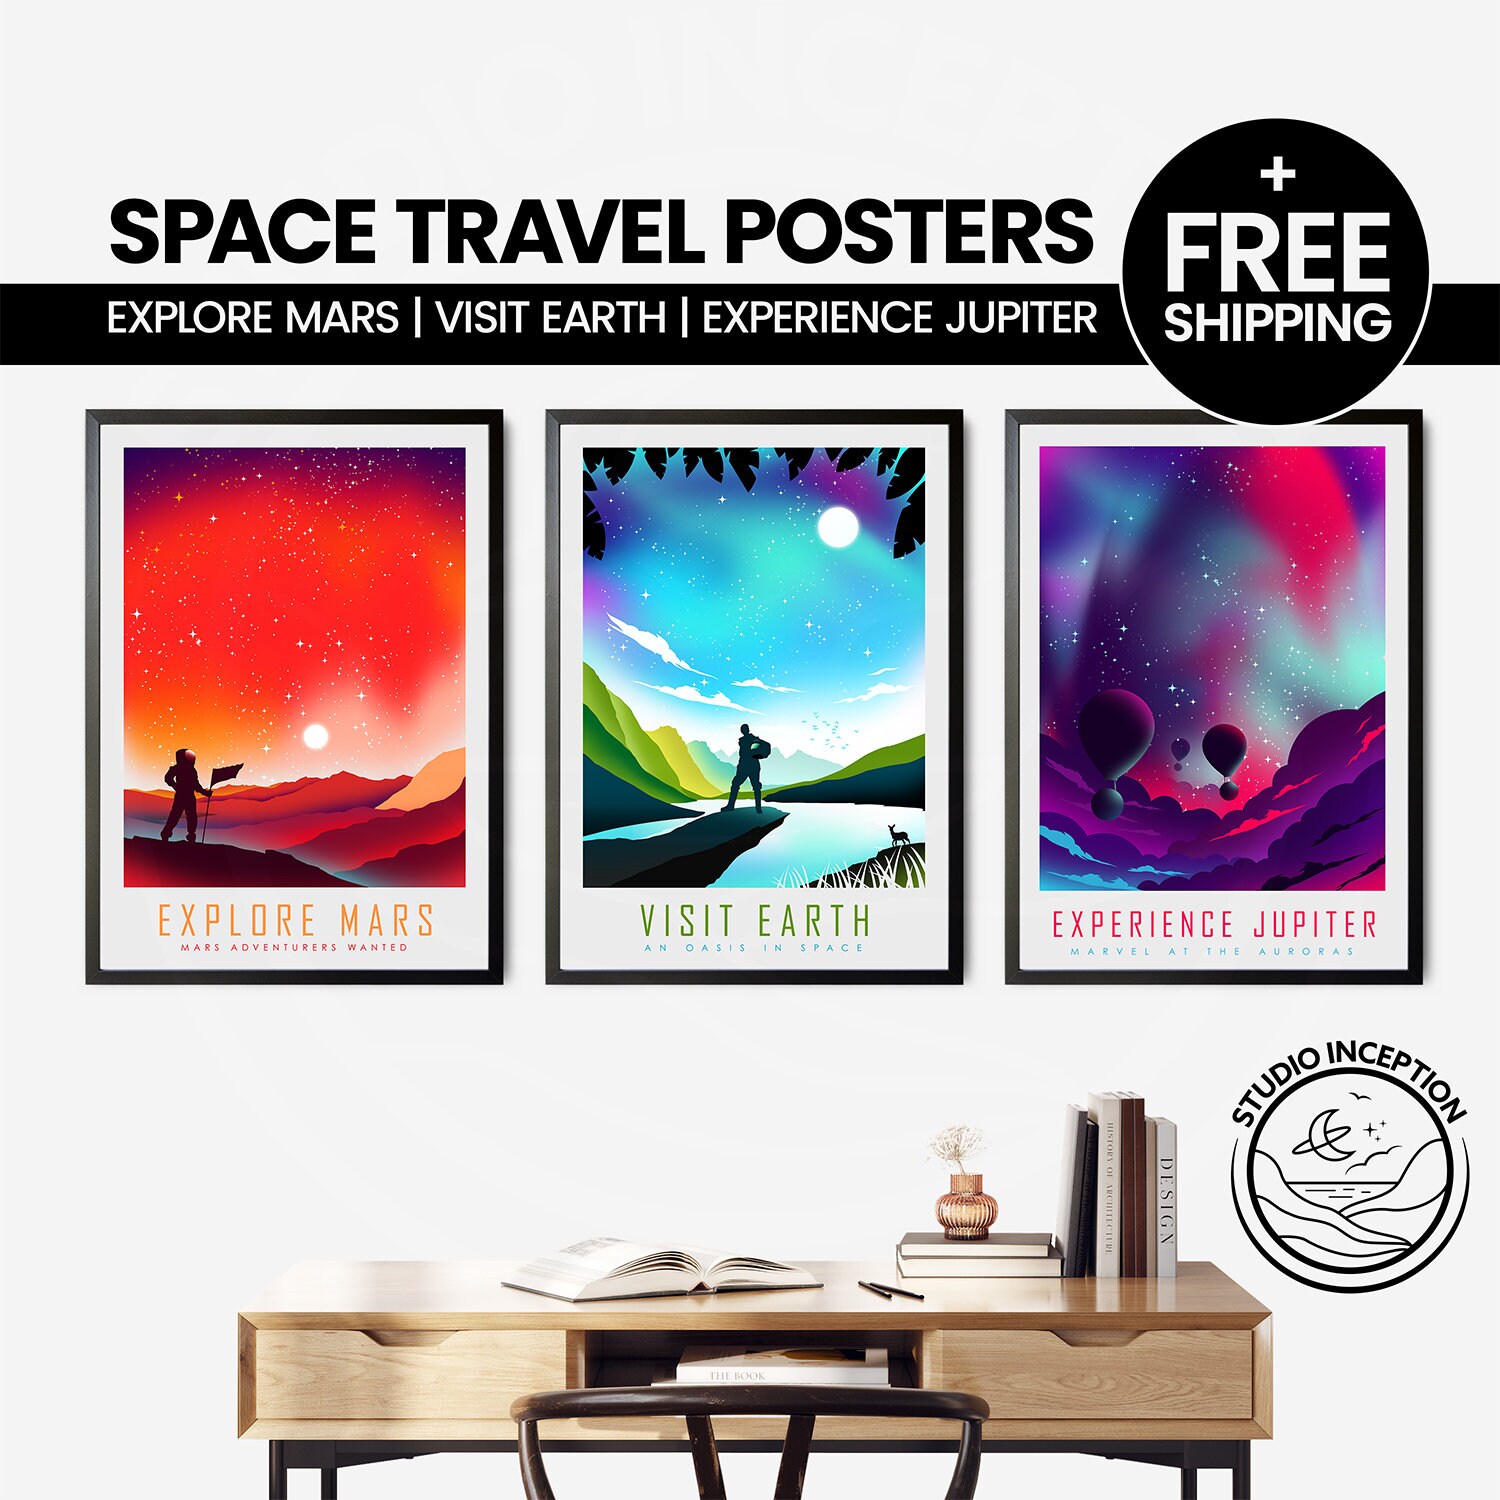  Wall Decor Master Elite Dangerous Ships Space Stars Flying Man  20X30 Inch Poster Print: Posters & Prints